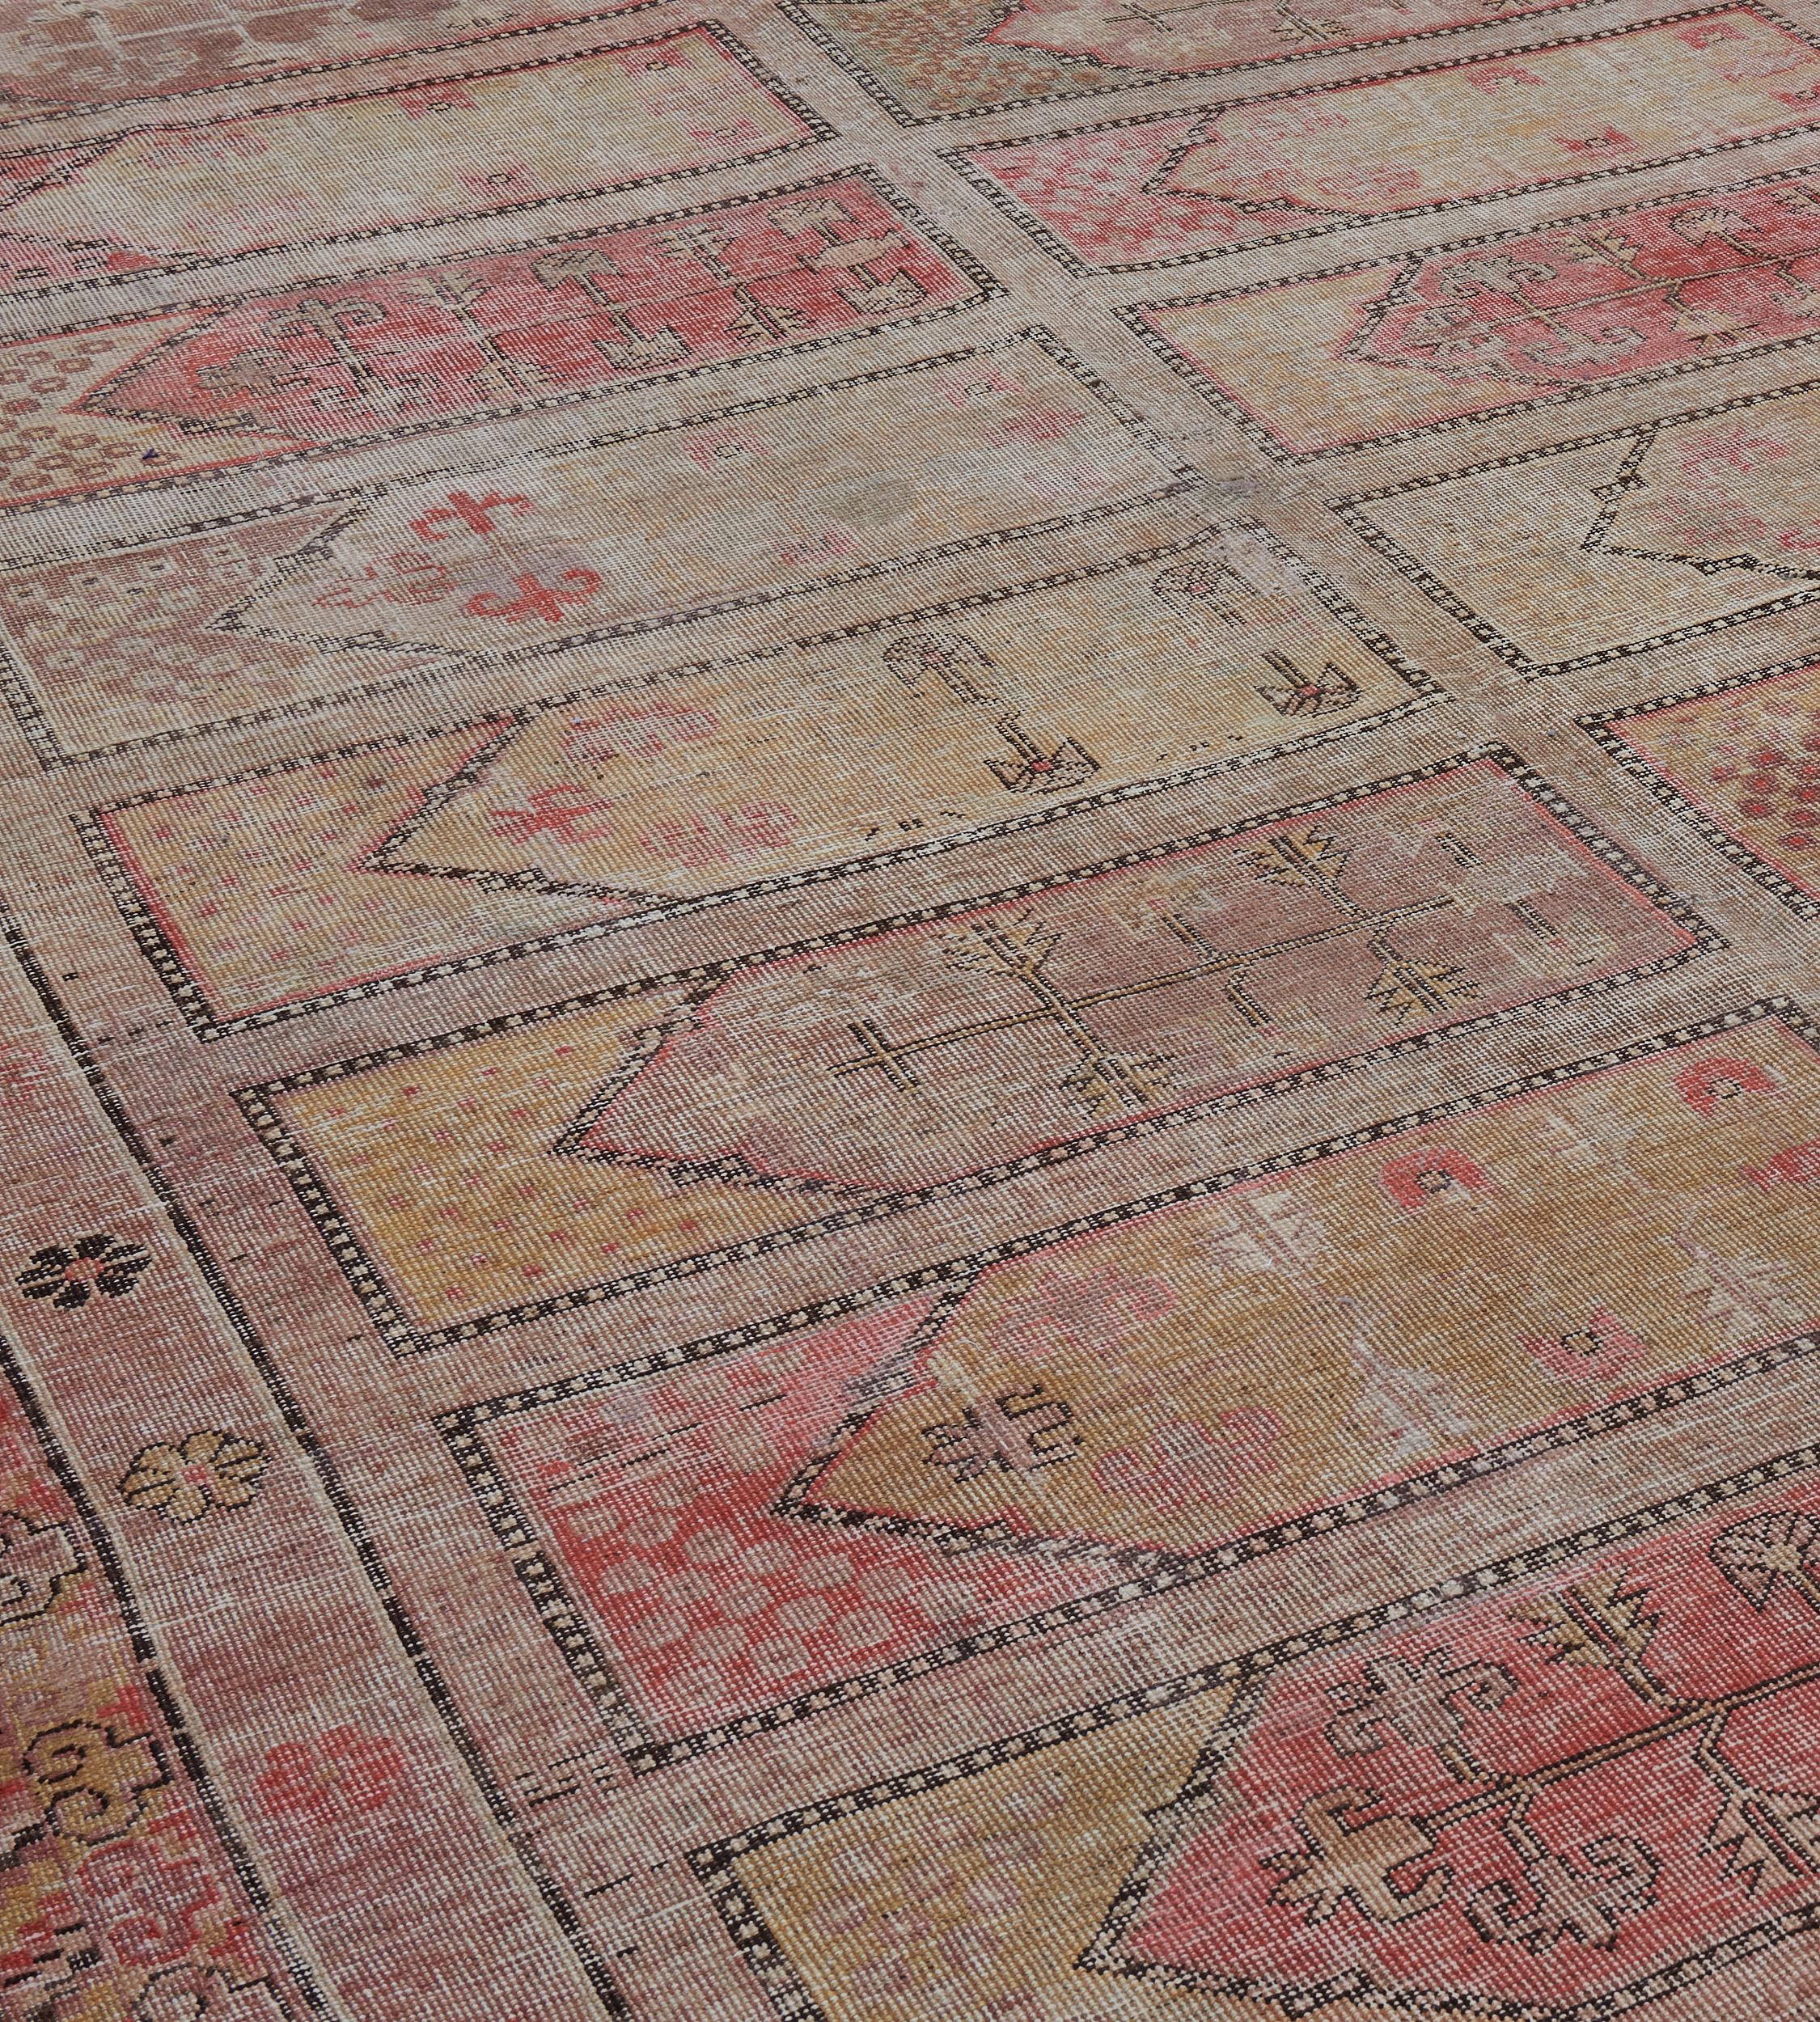 This traditional hand-woven Samarkand Khotan rug has a shaded beige prayer rug field with each panel enclosing flowering vase, in elegant traditional Chinese floral and geometric borders.